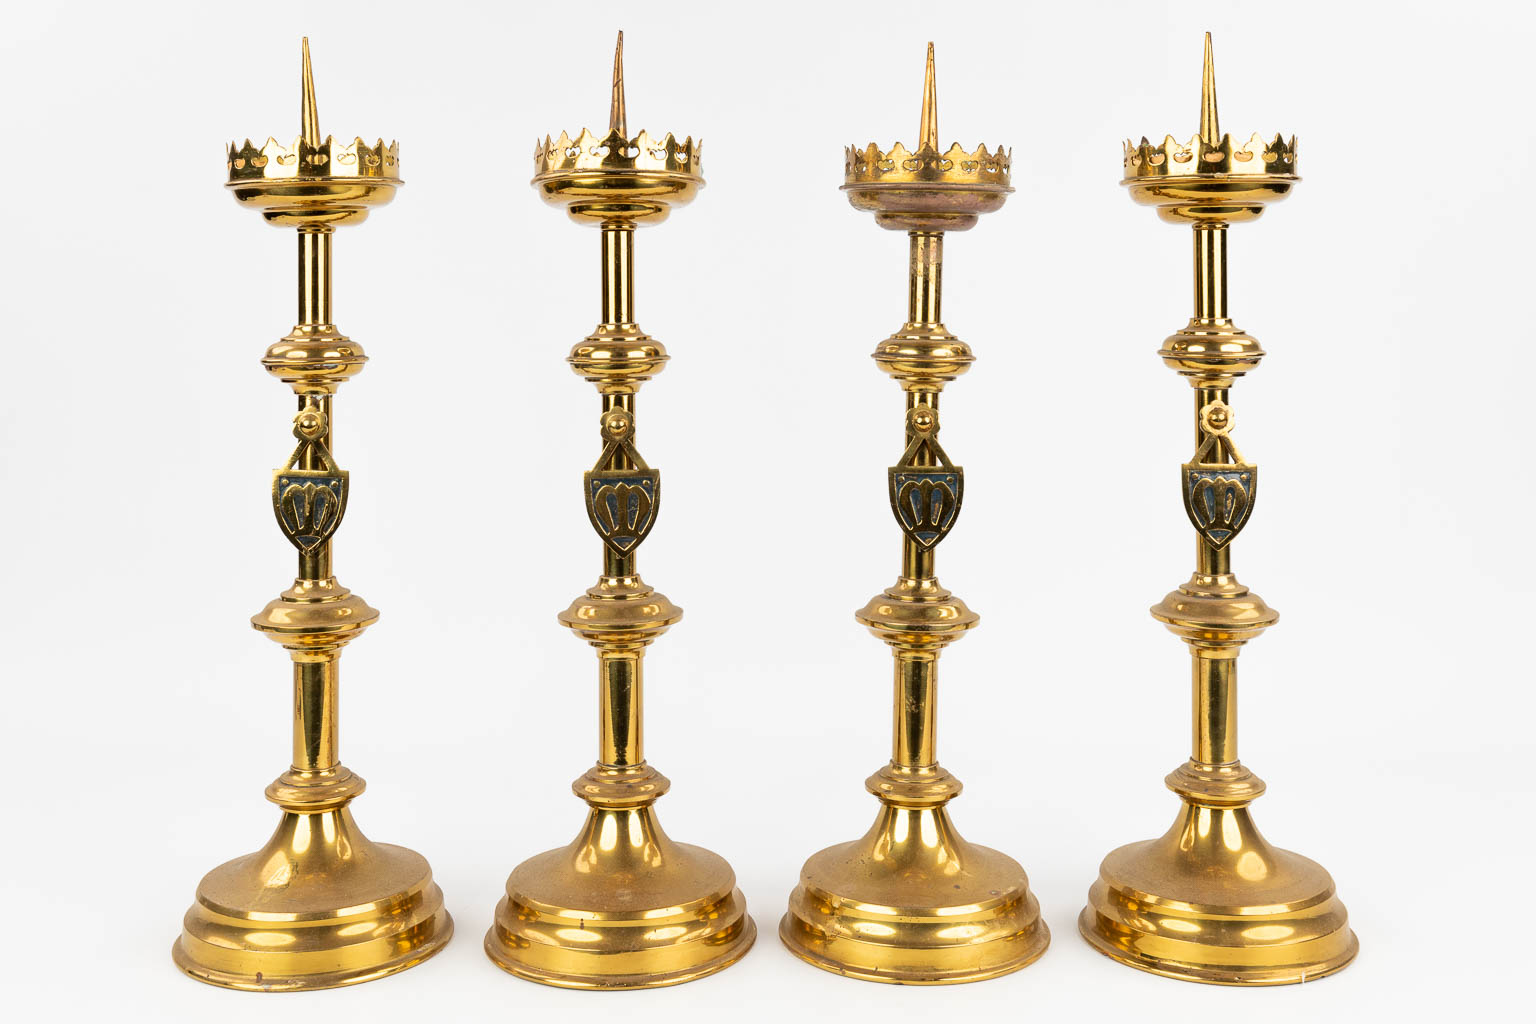 A set of 4 Church candlesticks made of bronze in gothic revival style. (H: 50 cm)